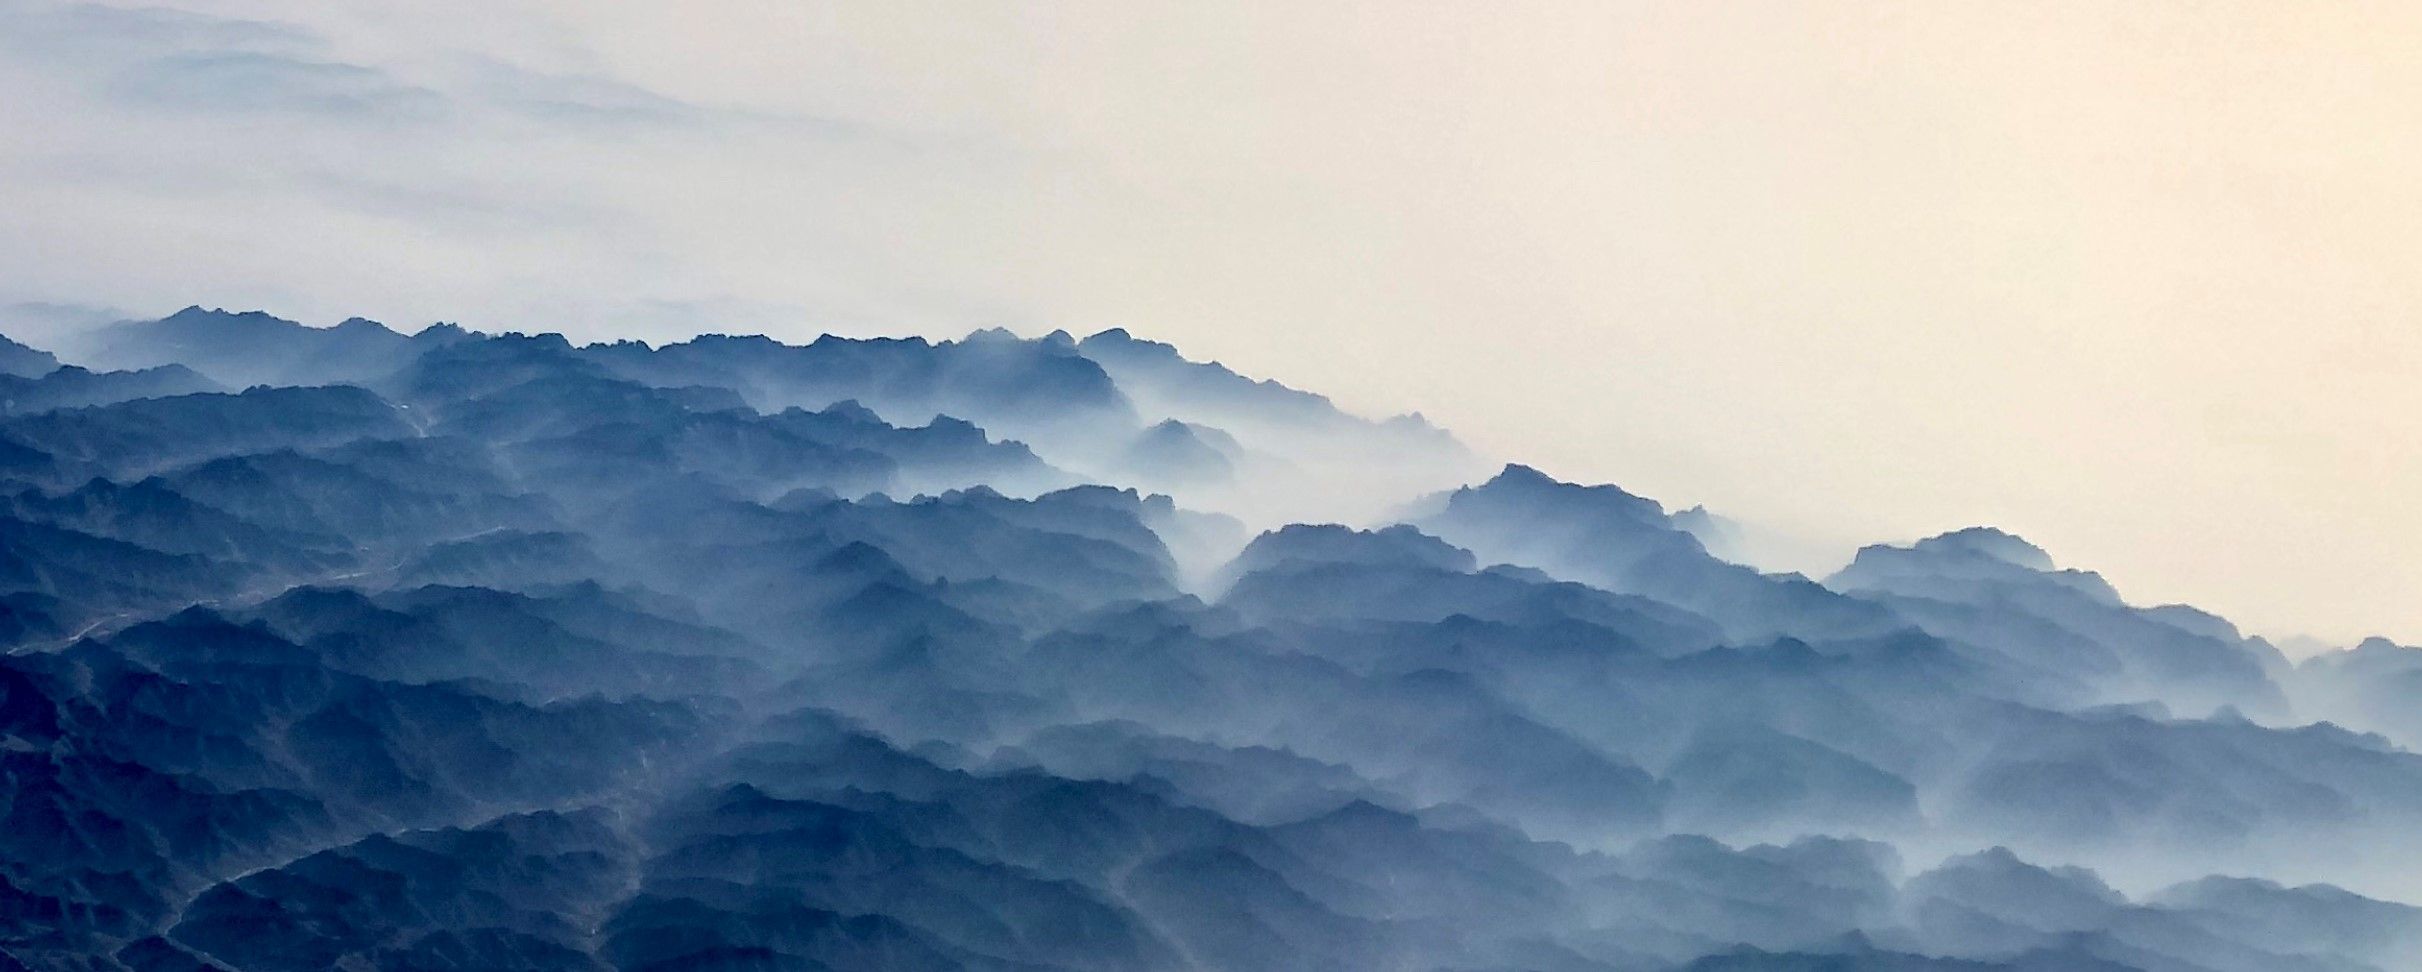 Like a Chinese watercolor painting - Mongolian dawn shot from above